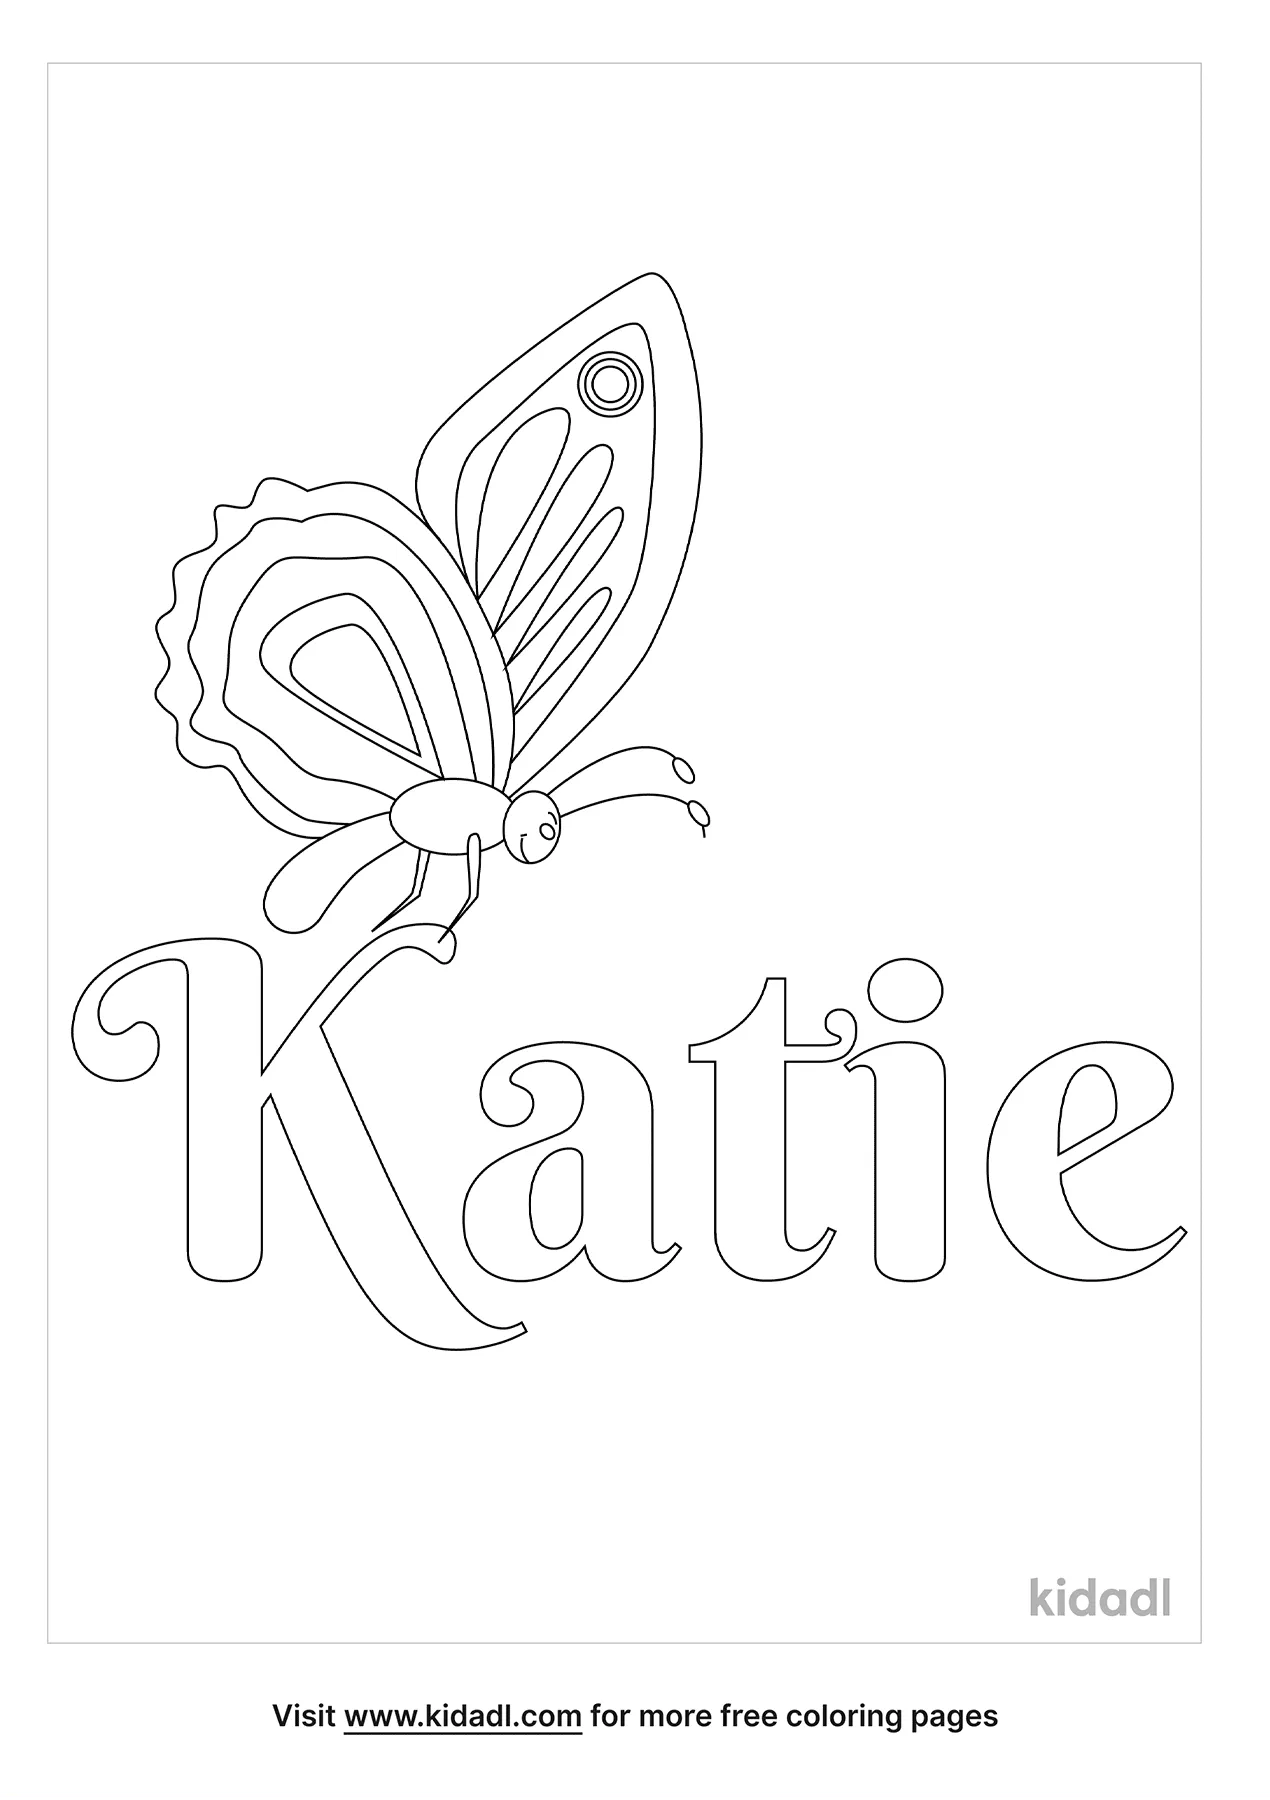 Names coloring page coloring pages